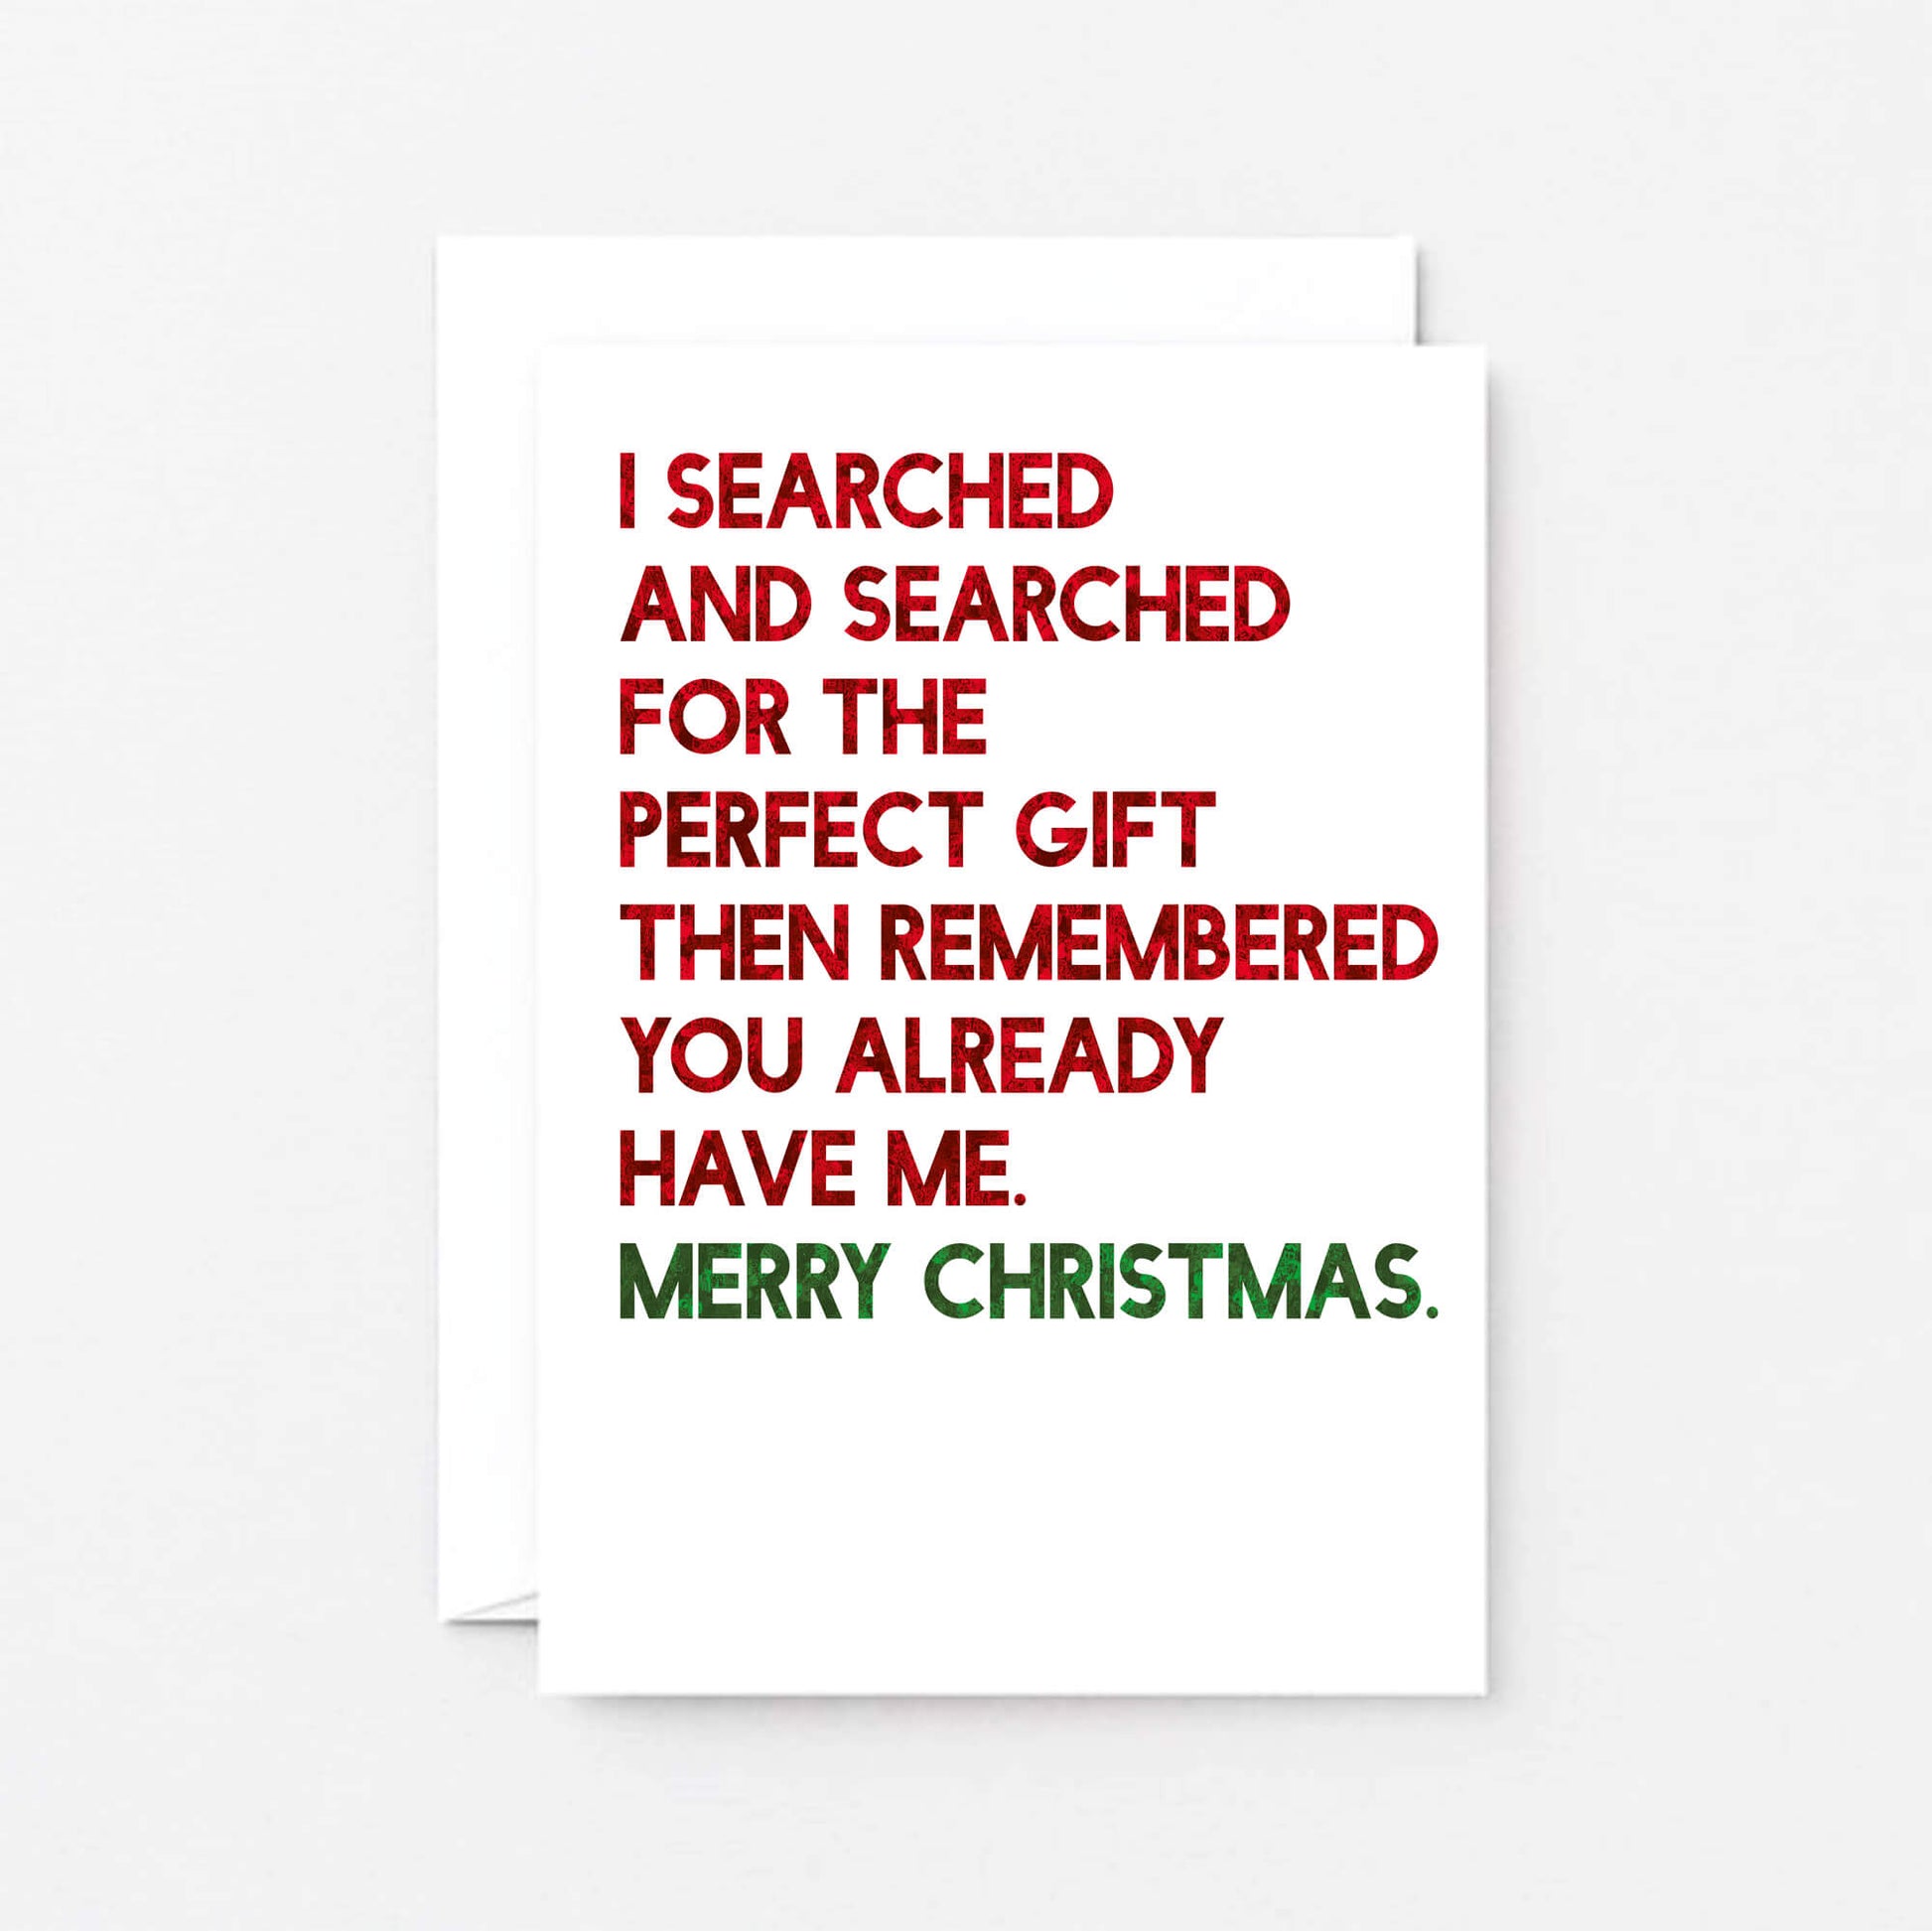 Christmas Card by SixElevenCreations. Reads I searched and searched for the perfect gift then remembered you already have me. Merry Christmas. Product Code SEC0055A6